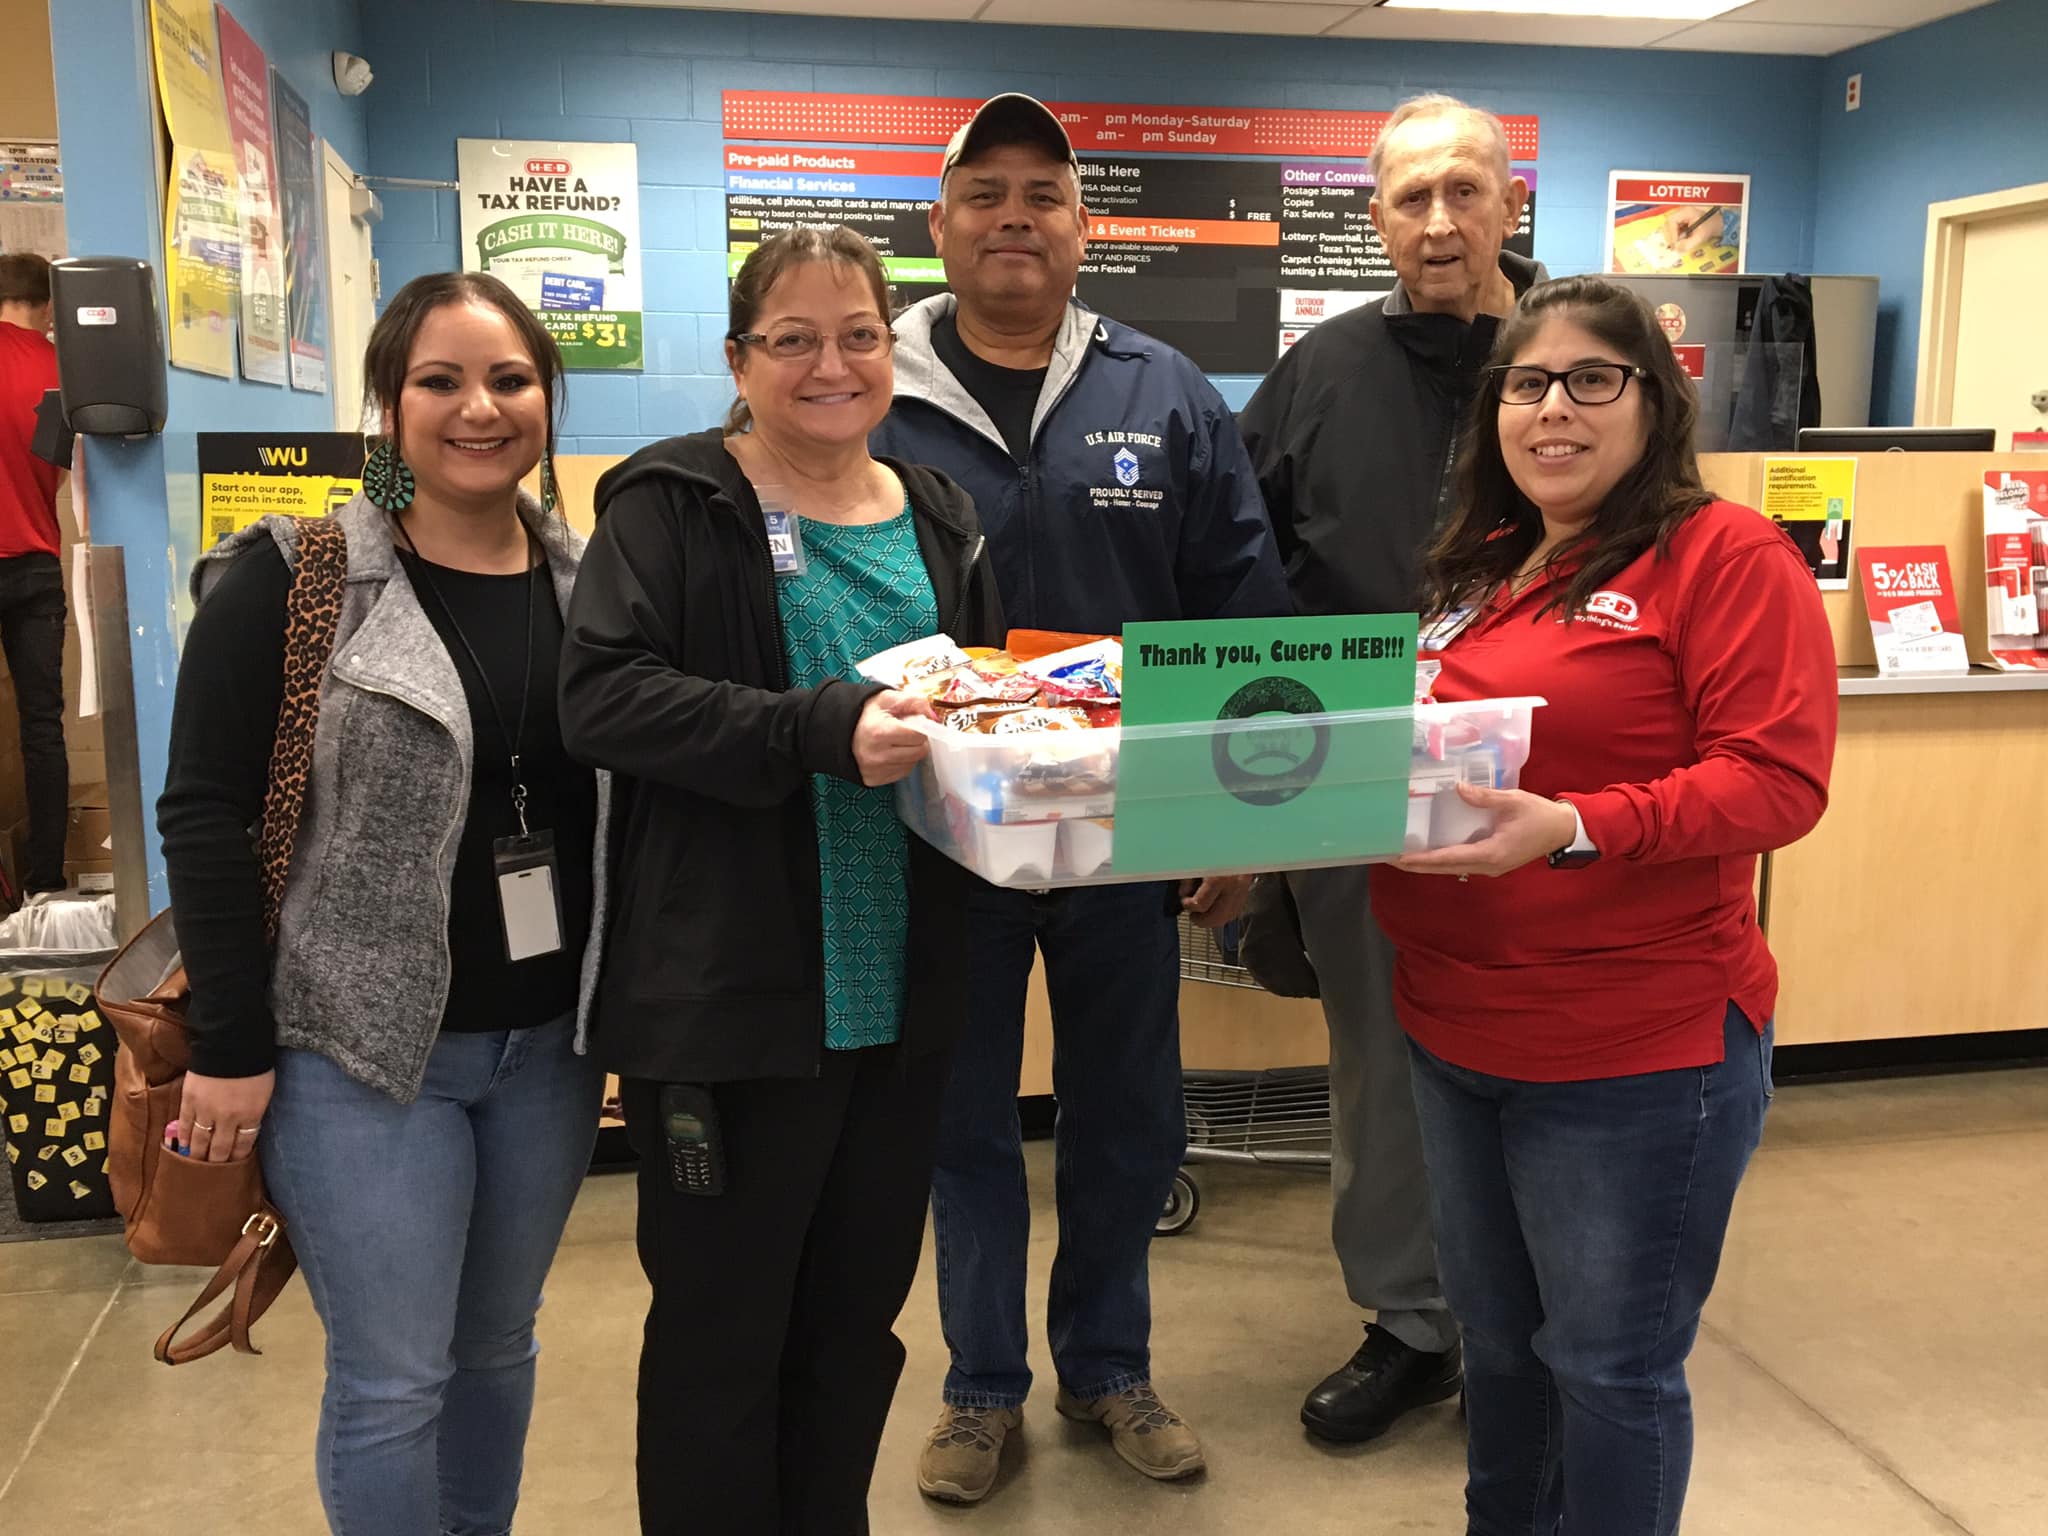 December Events Committee presents “thank you” snack care package to H-E-B Grocery of Cuero